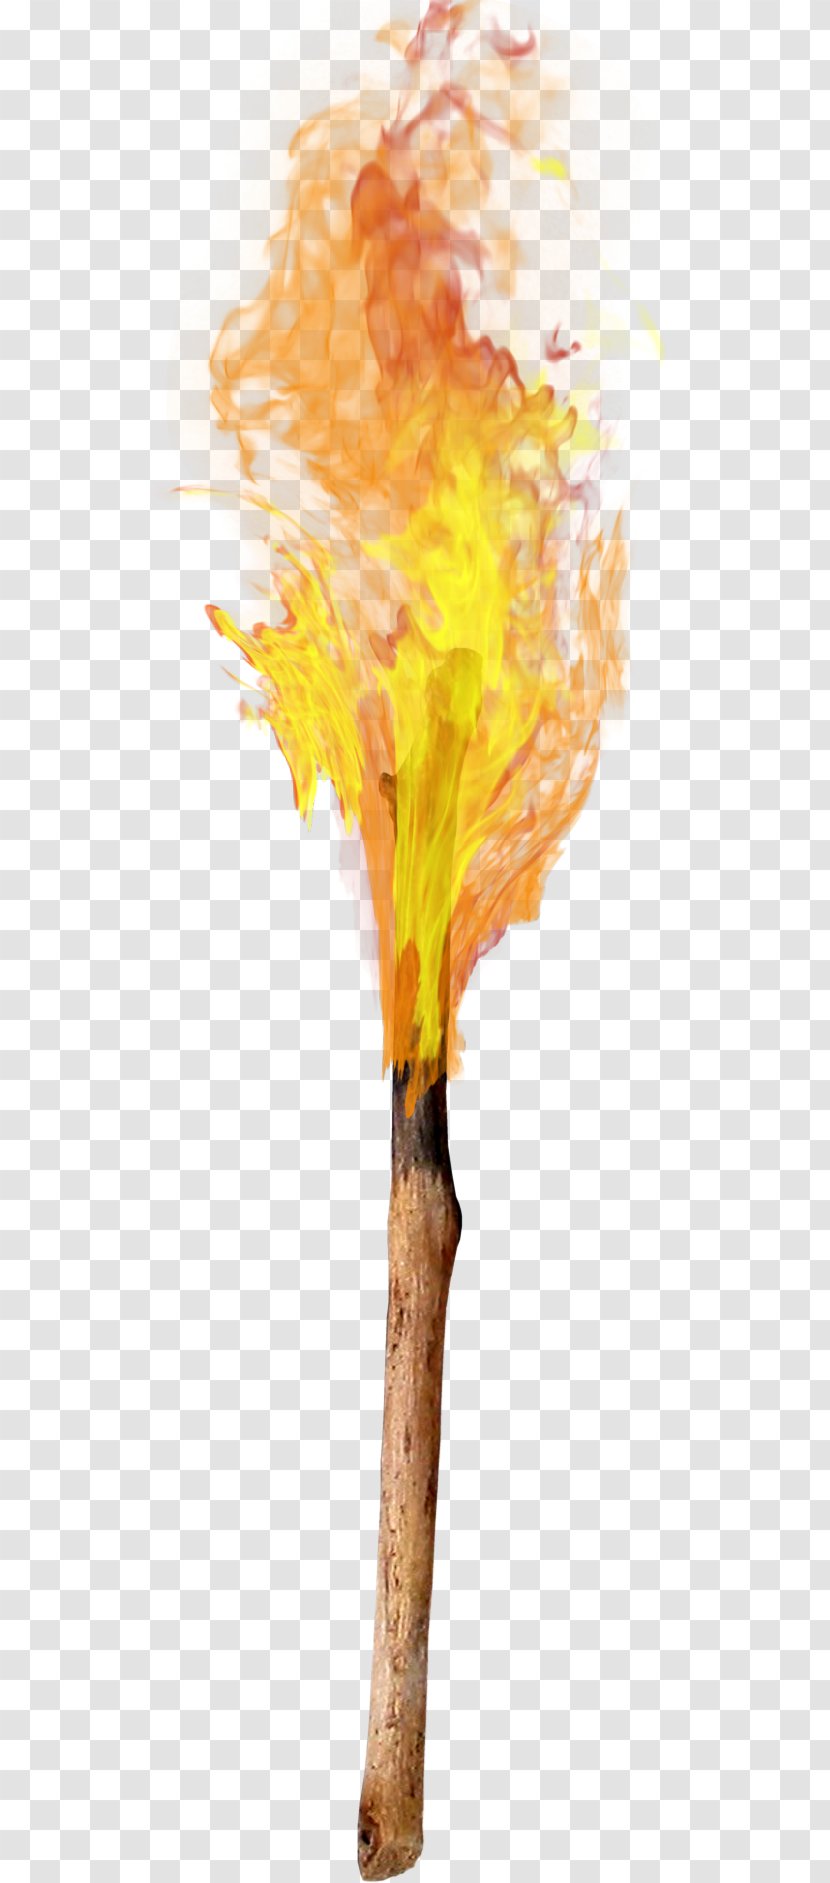 Torch Flame Combustion - Flower Transparent PNG